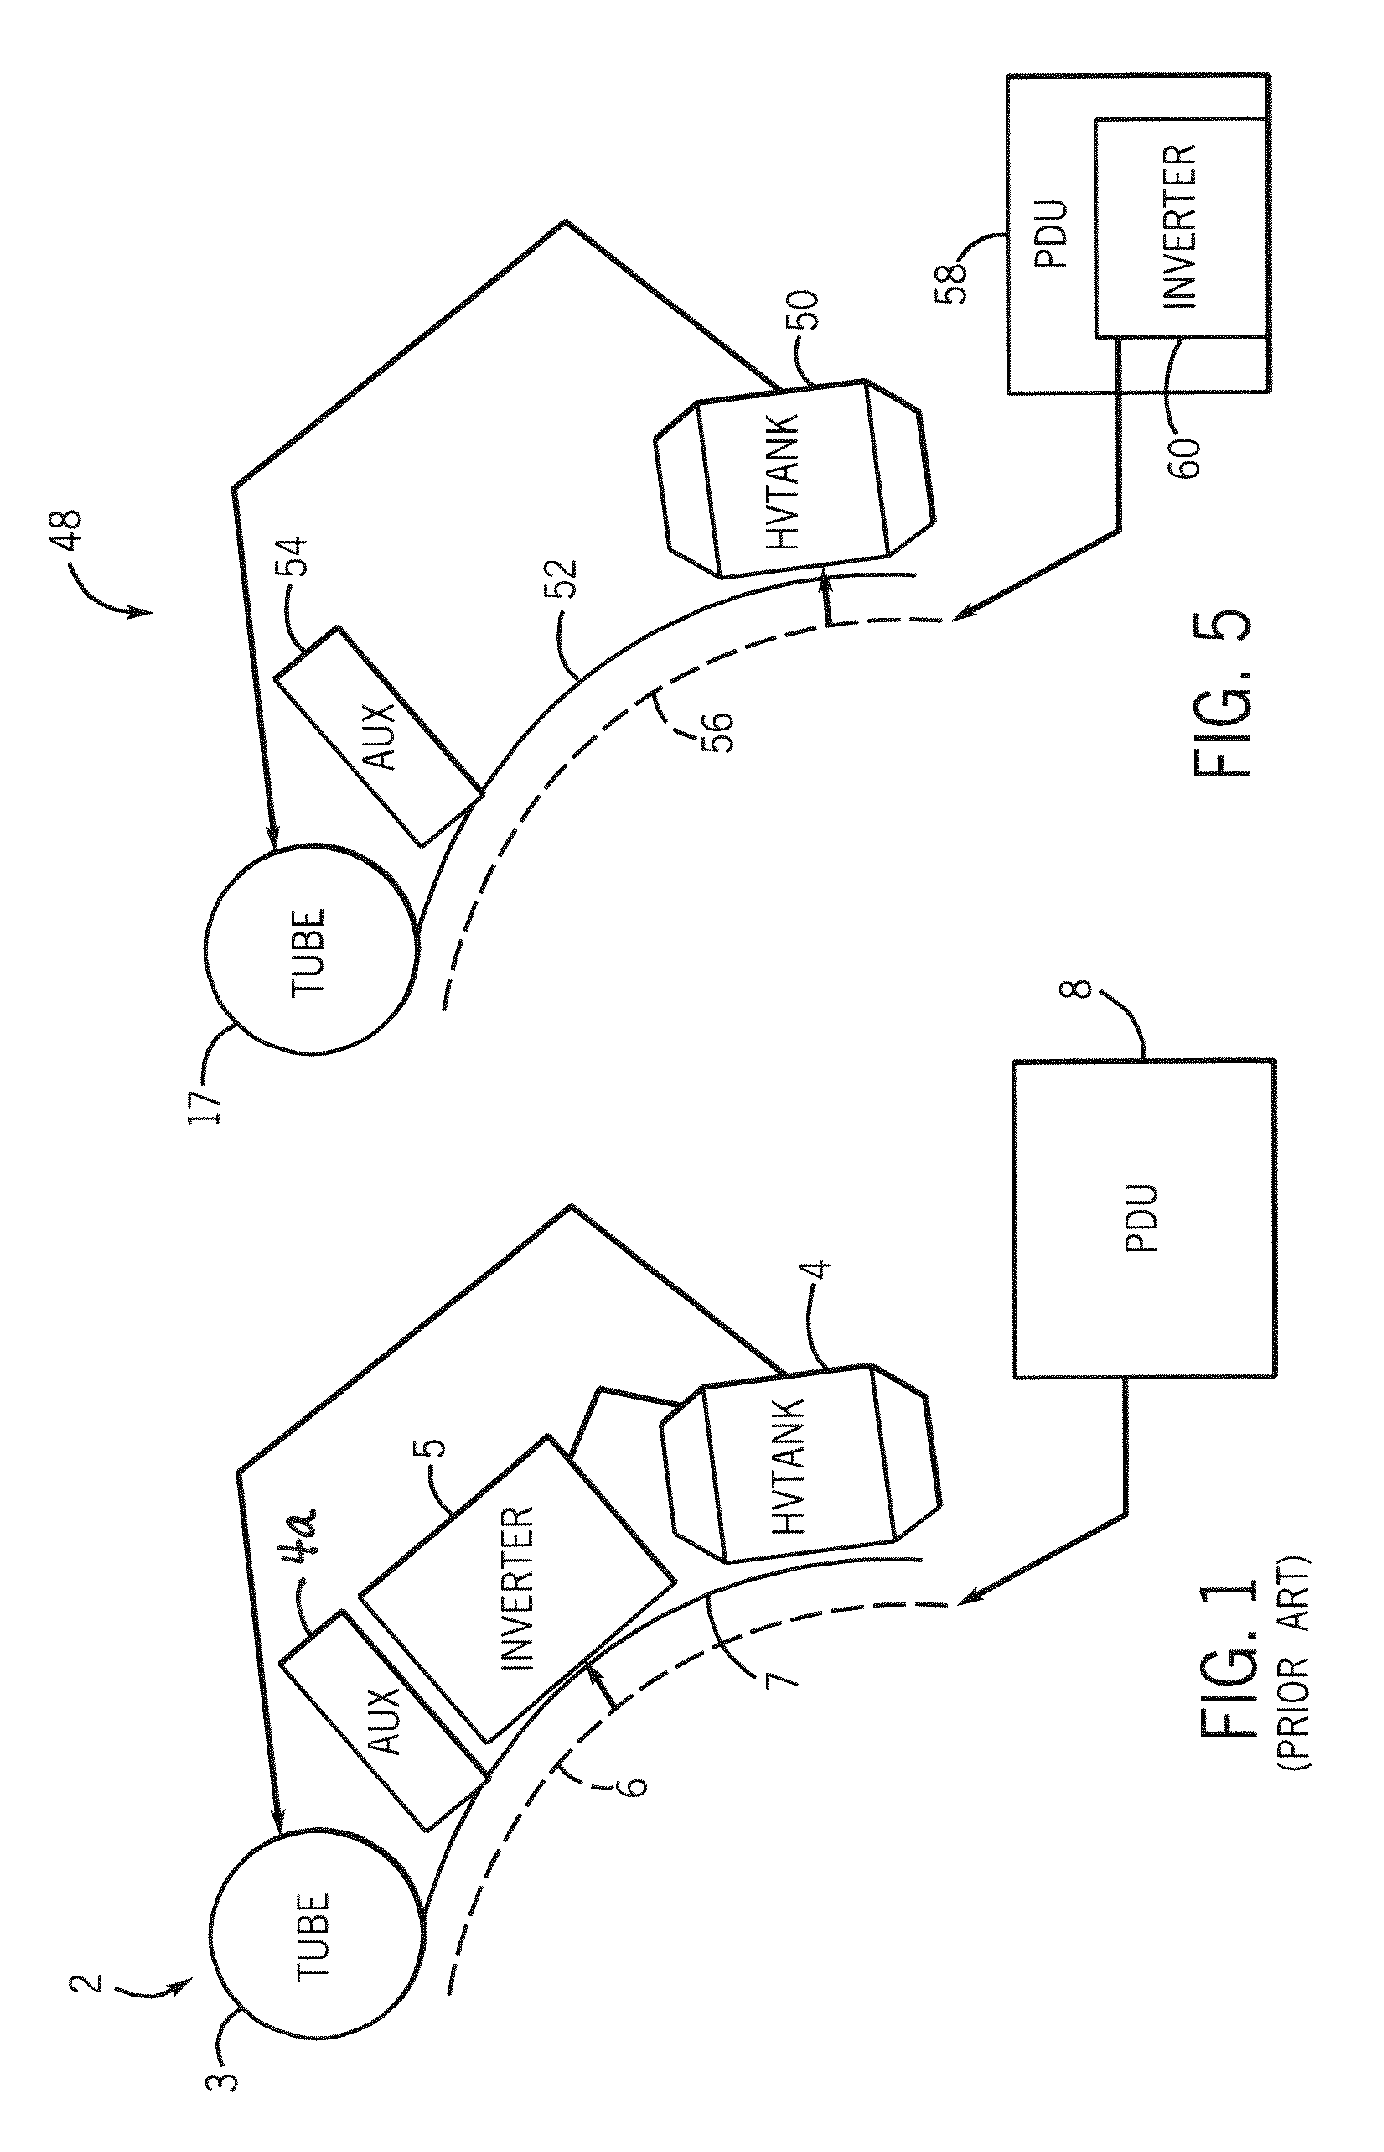 X-ray generator and slip ring for a CT system